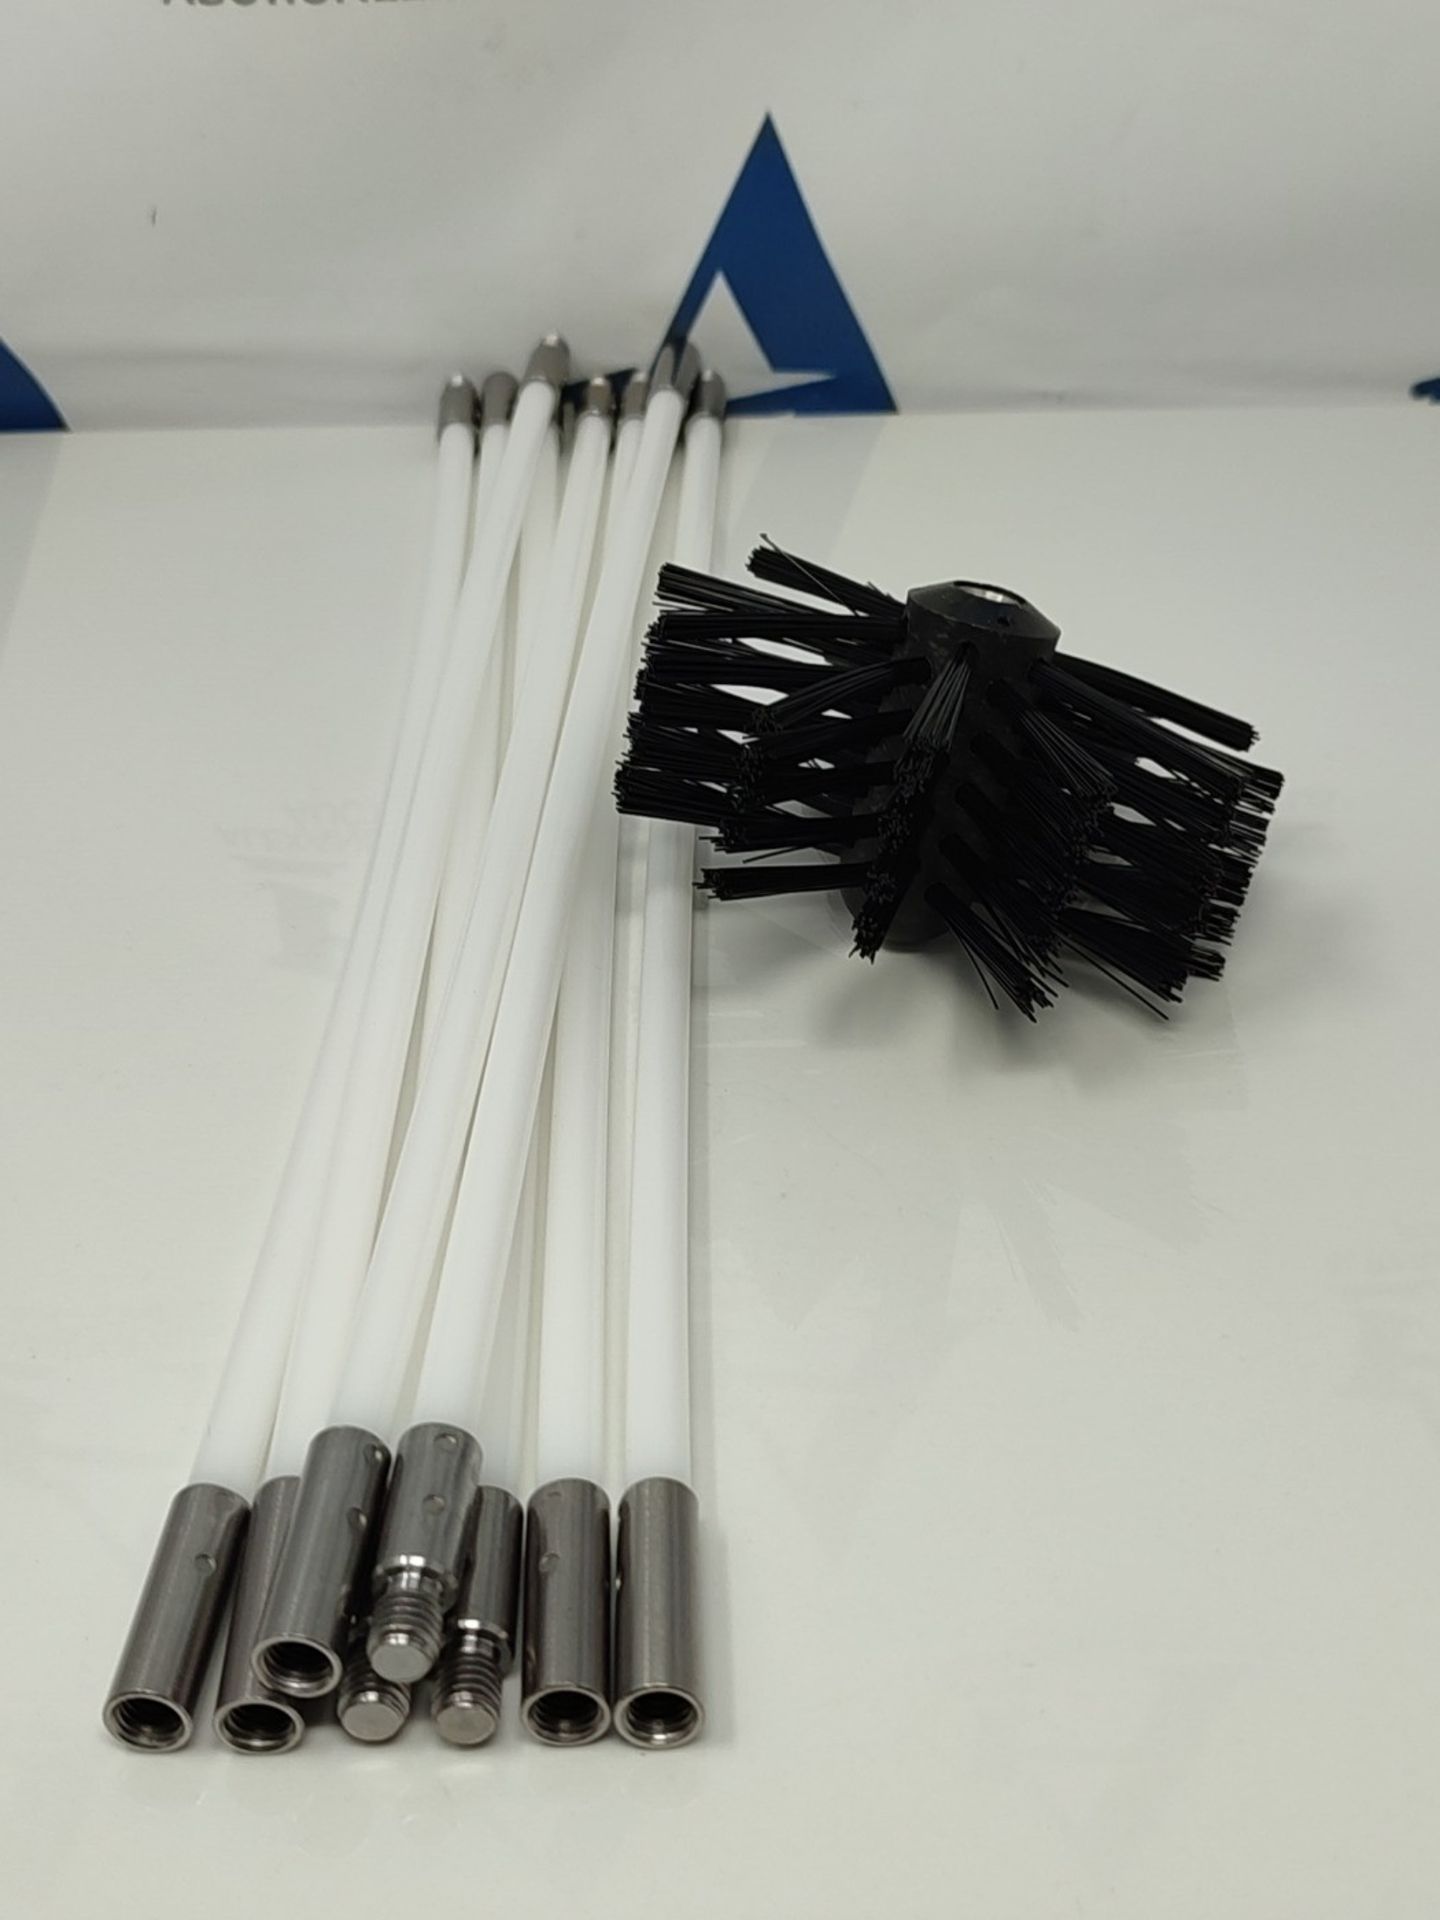 Chimney Cleaning Brush Kit Chimney Sweep Rods, Duct Vent Cleaning Set with 9 Nylon Fle - Image 4 of 4